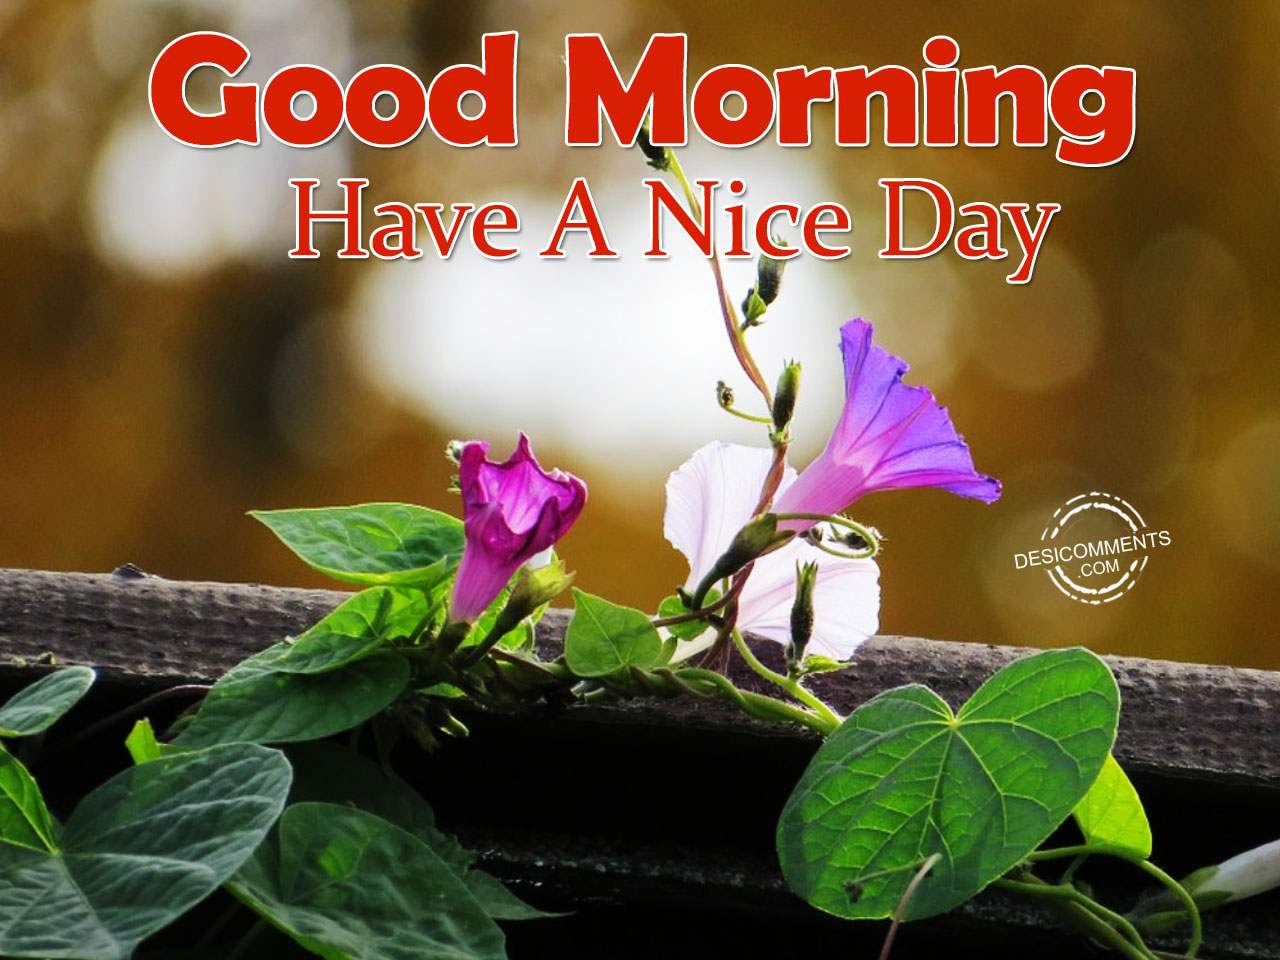 Image Of Have A Nice Day – Good Morning - DesiComments.com